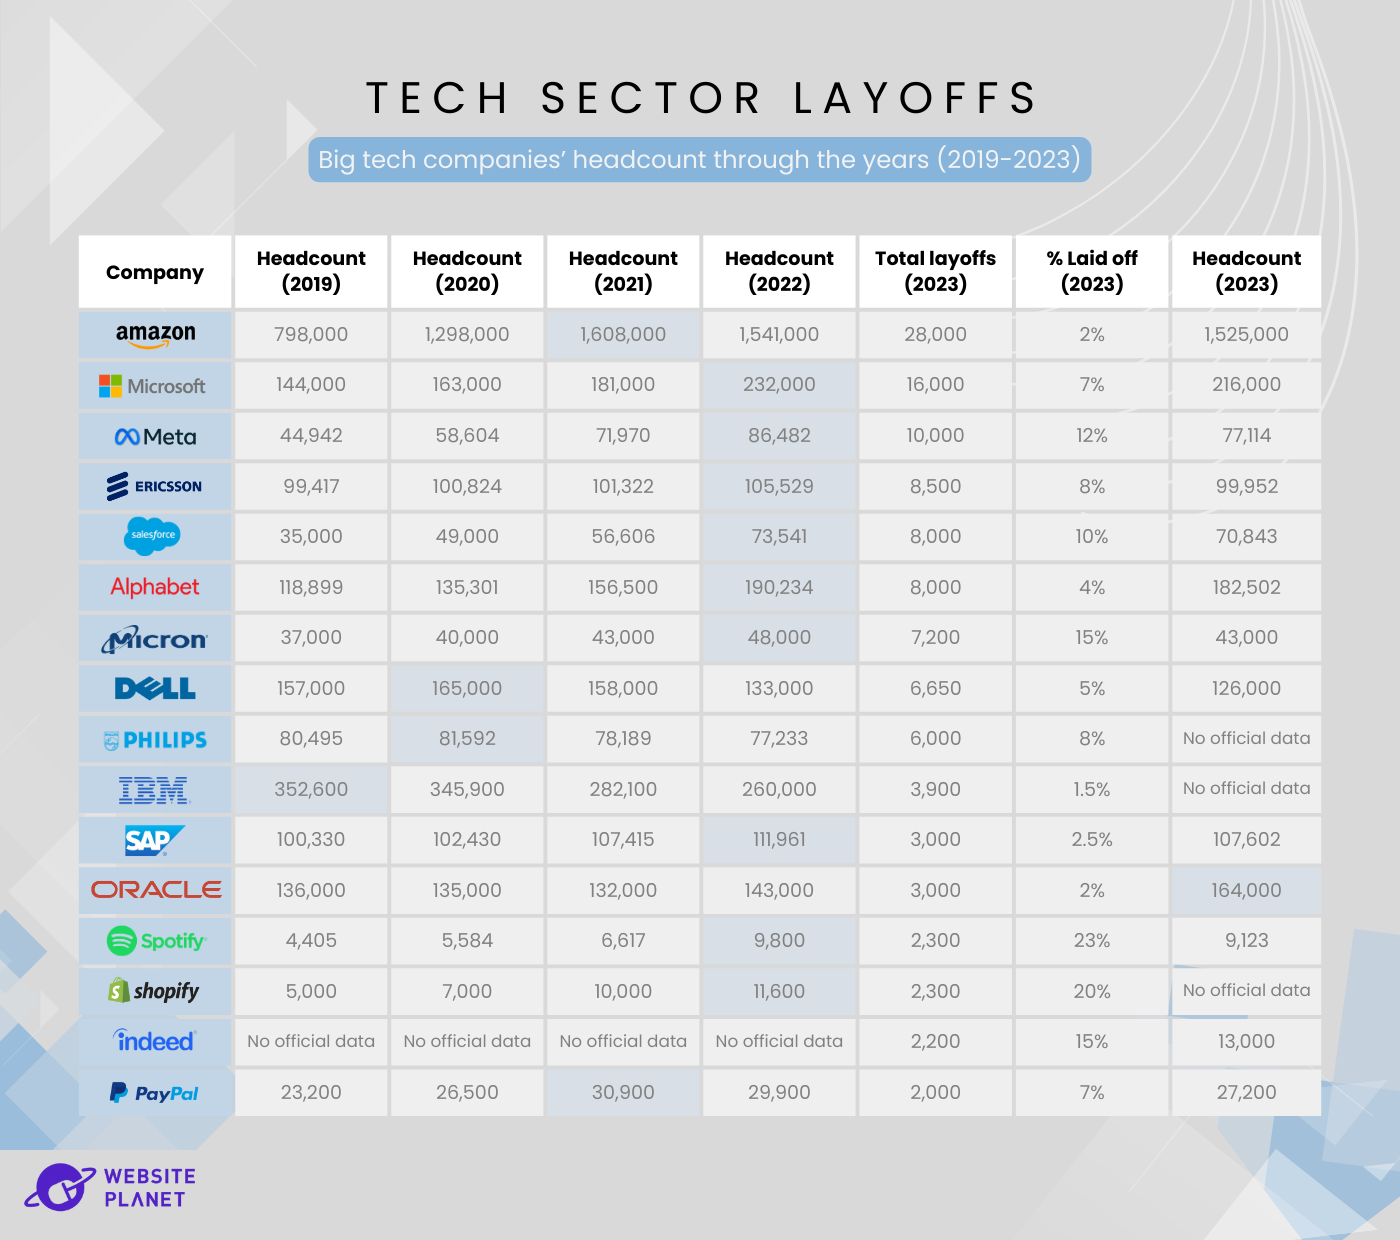 us-tech-sector-layoffs-what-s-next-on-the-horizon--25.png